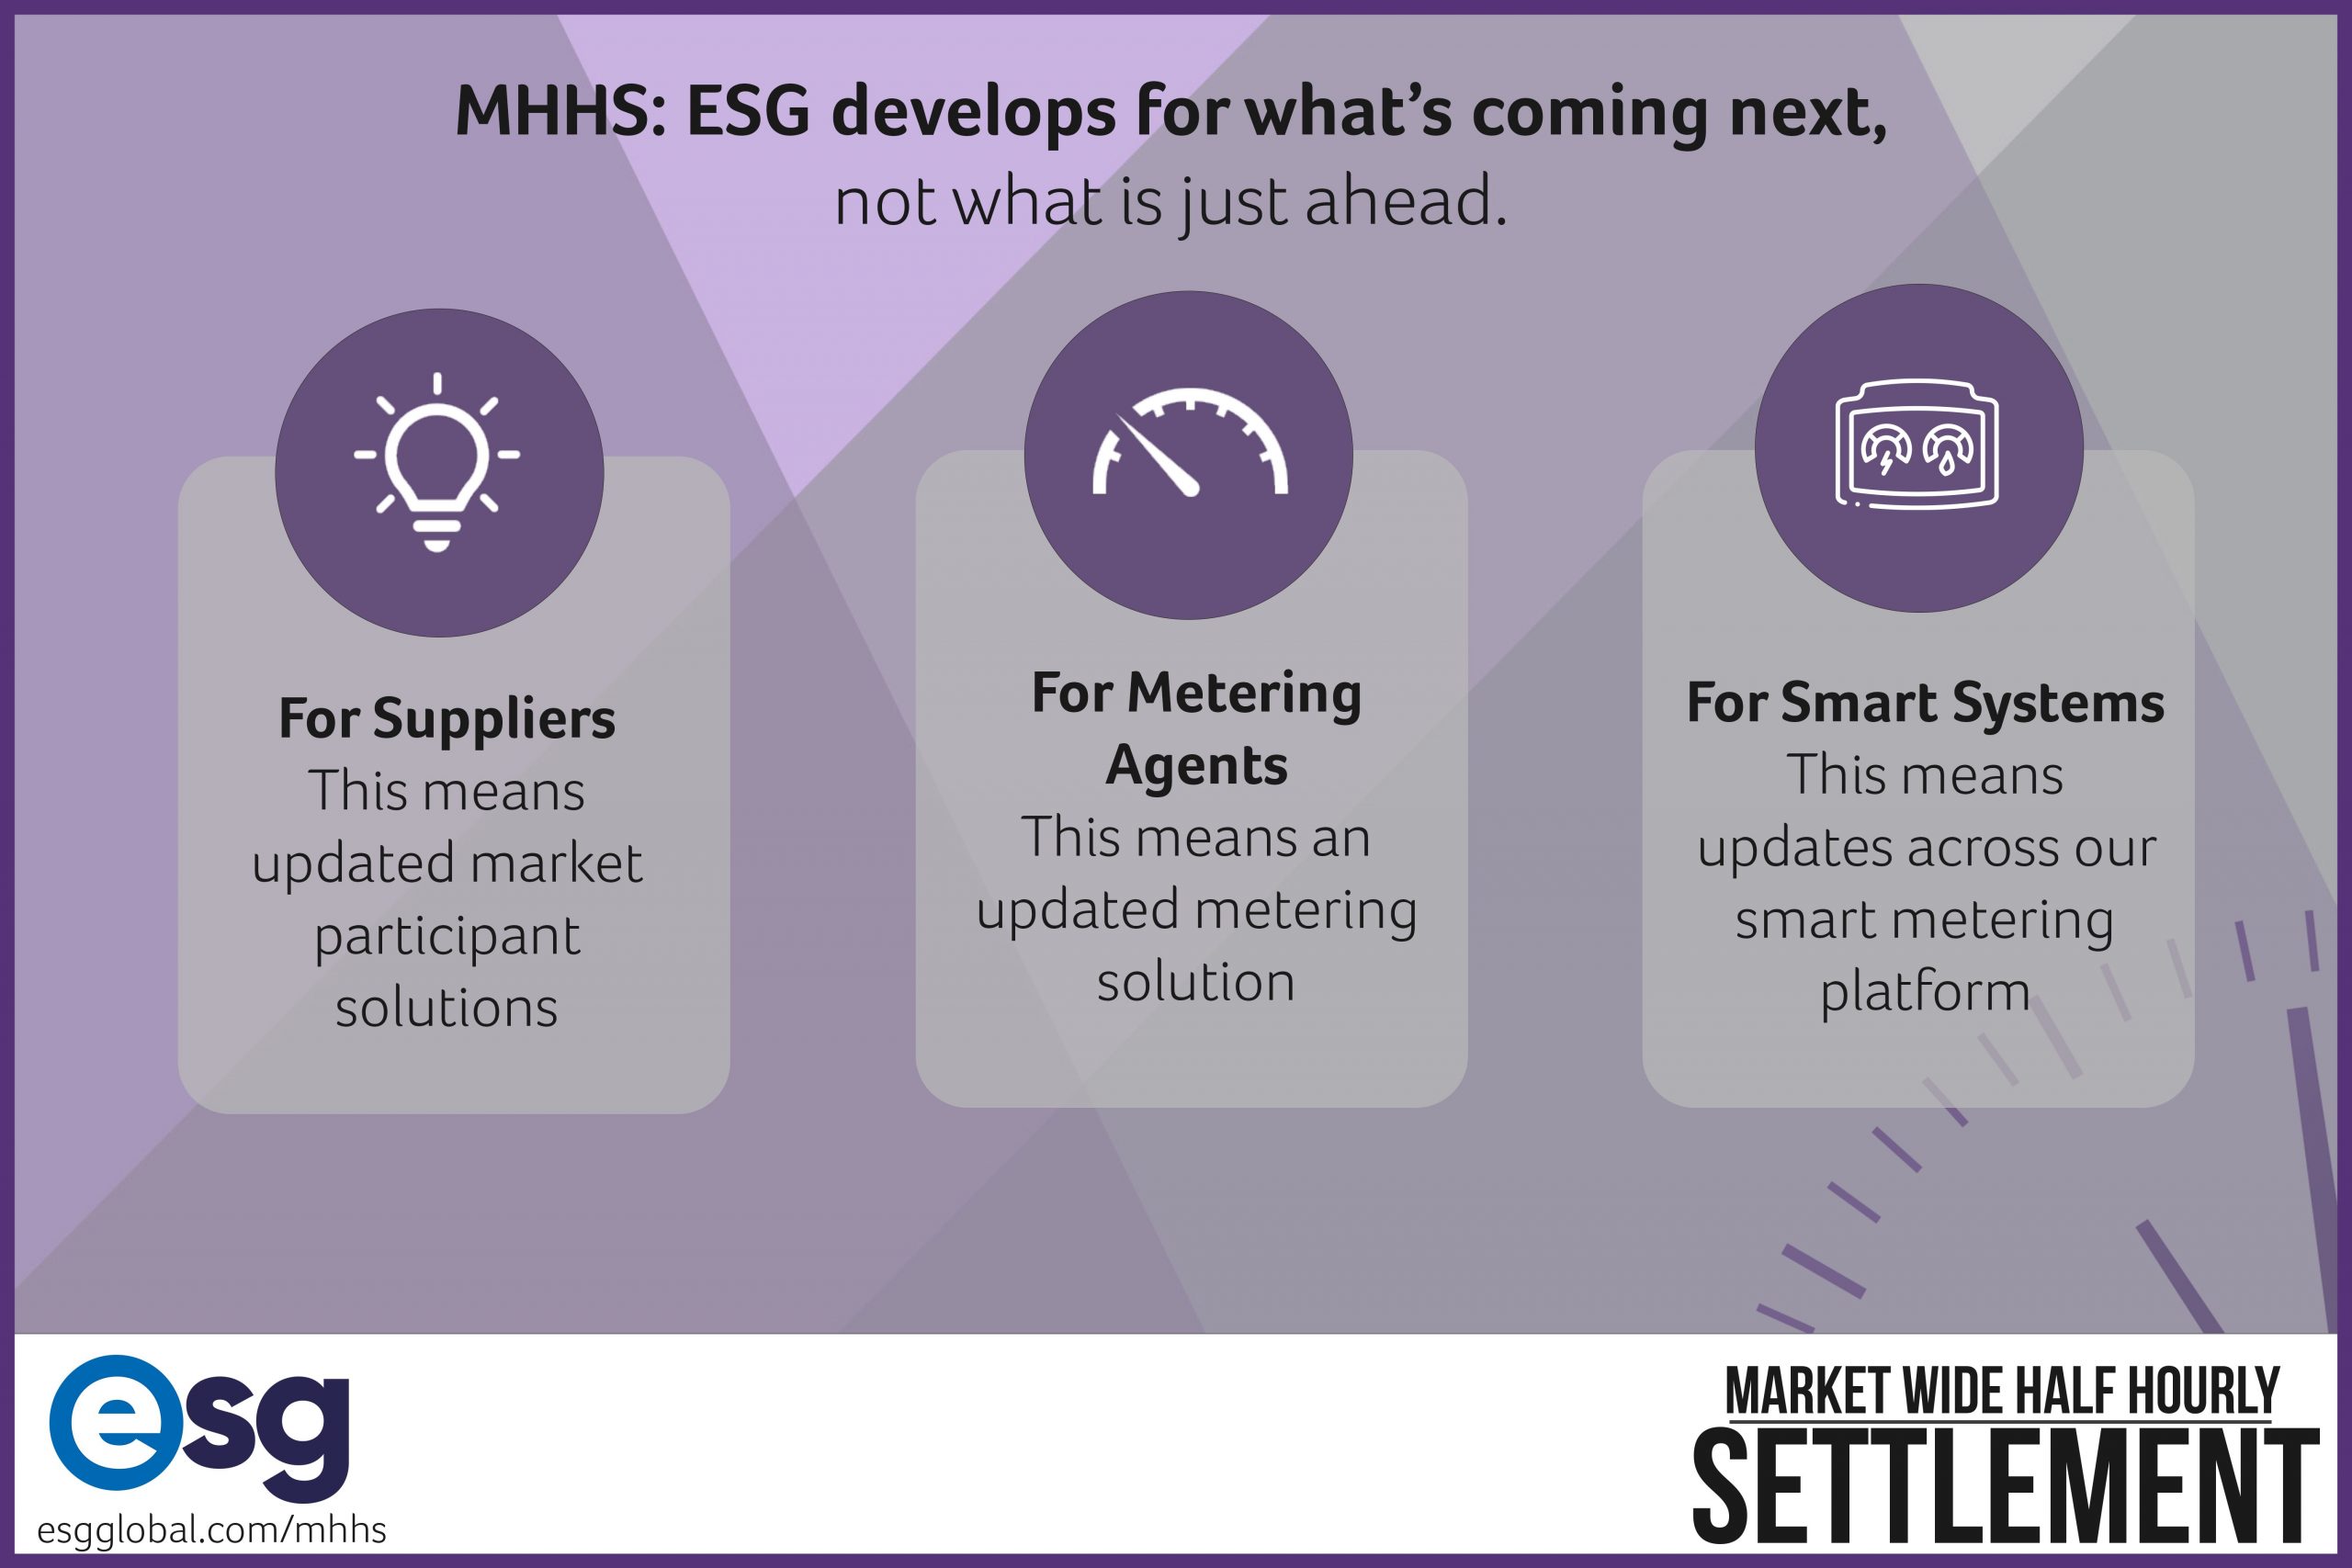 MHHS: ESG develops for what’s coming next, not what is just ahead.